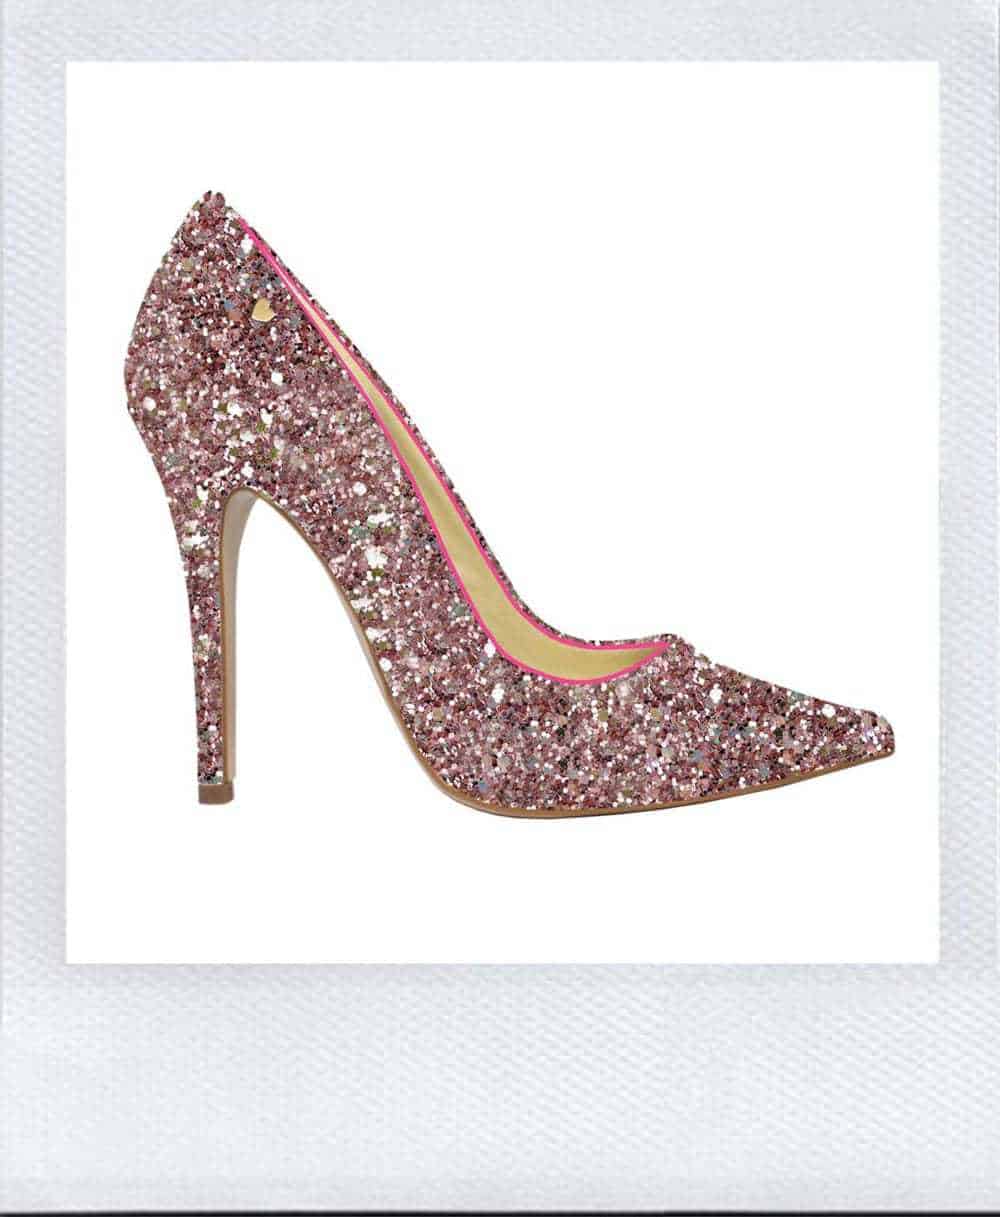 Pink sequin sparkle stiletto heels from Mink Shoes